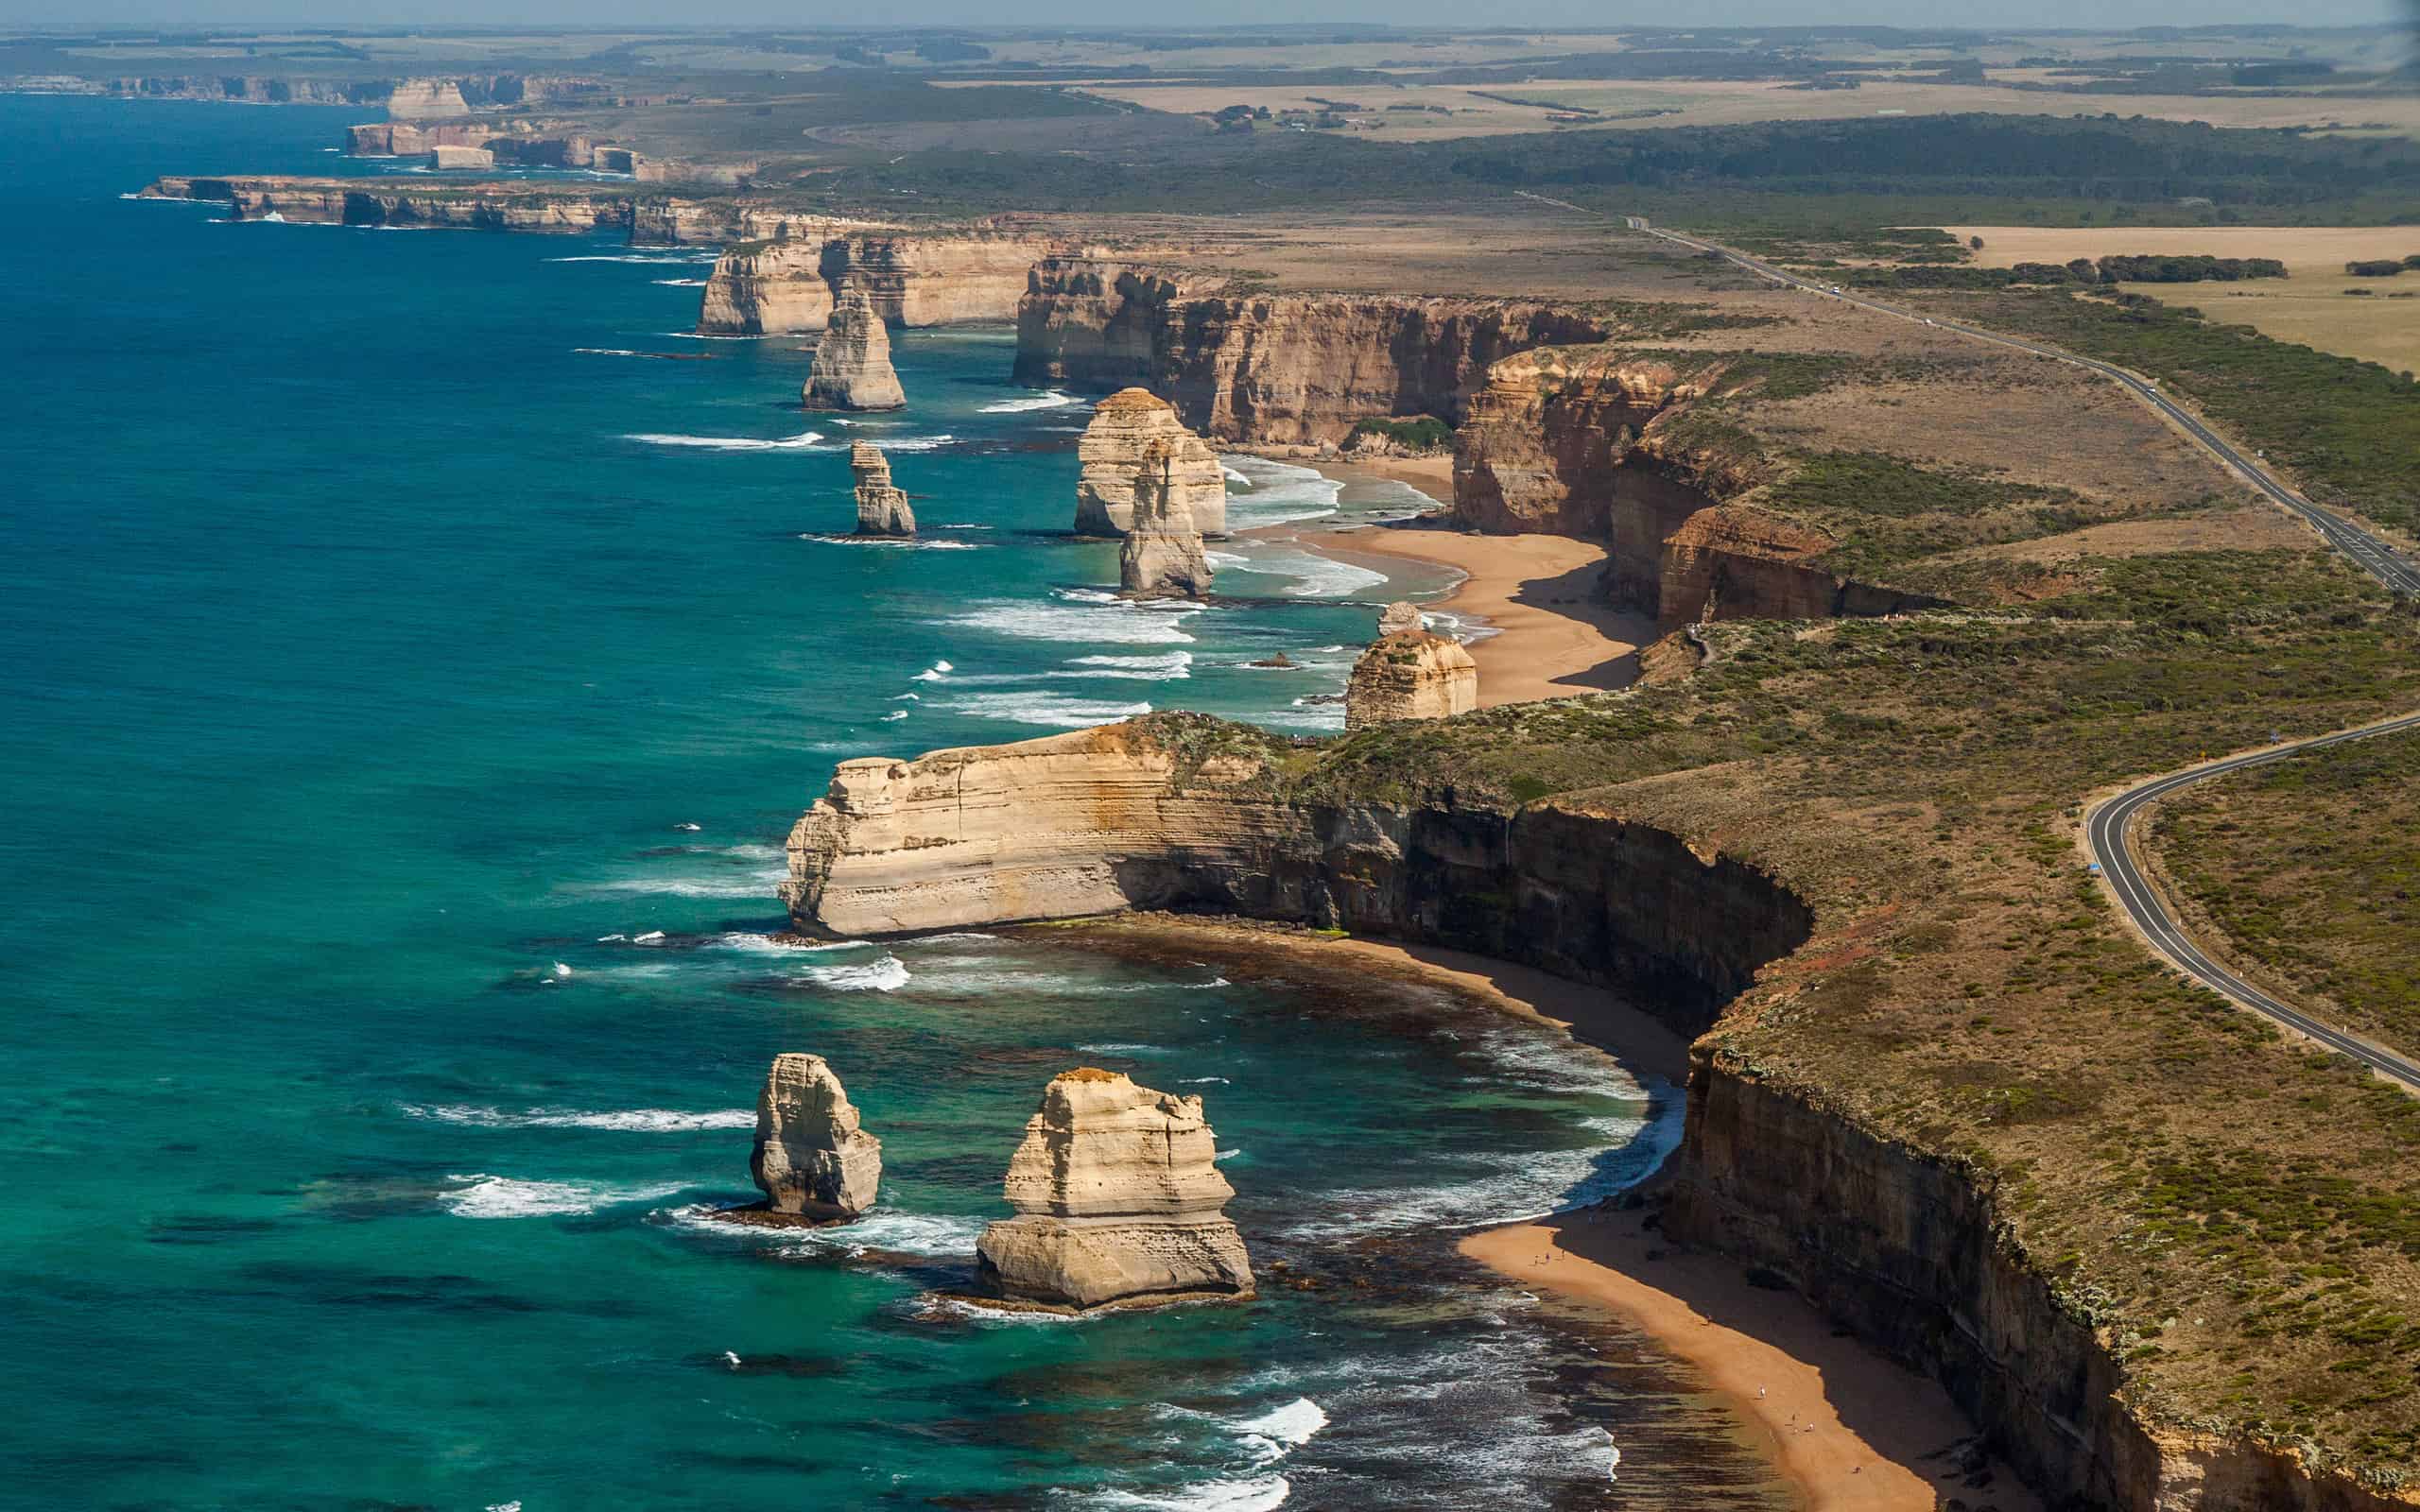 The Twelve Apostles and Great Ocean Road from the air